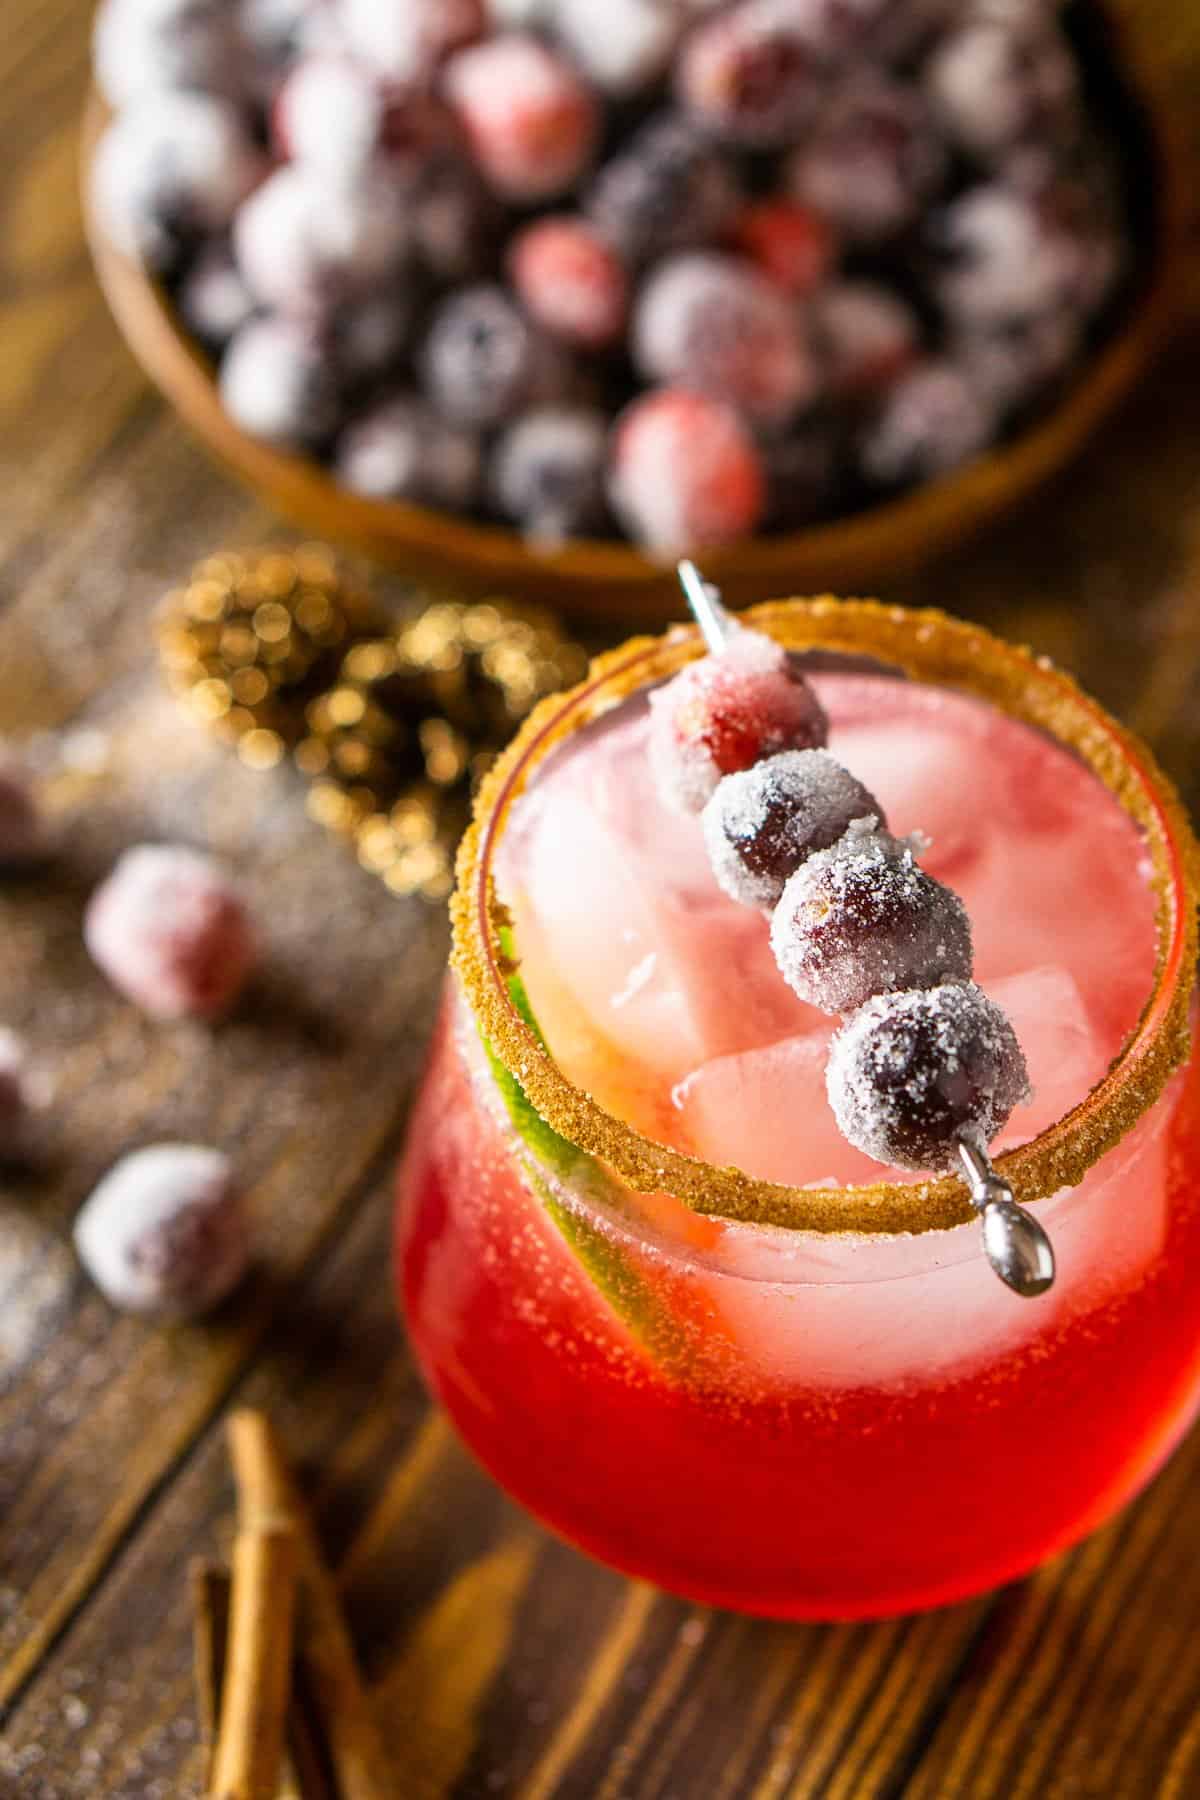 A close-up view of a cranberry holiday margarita with a sugared cranberry garnish on top.